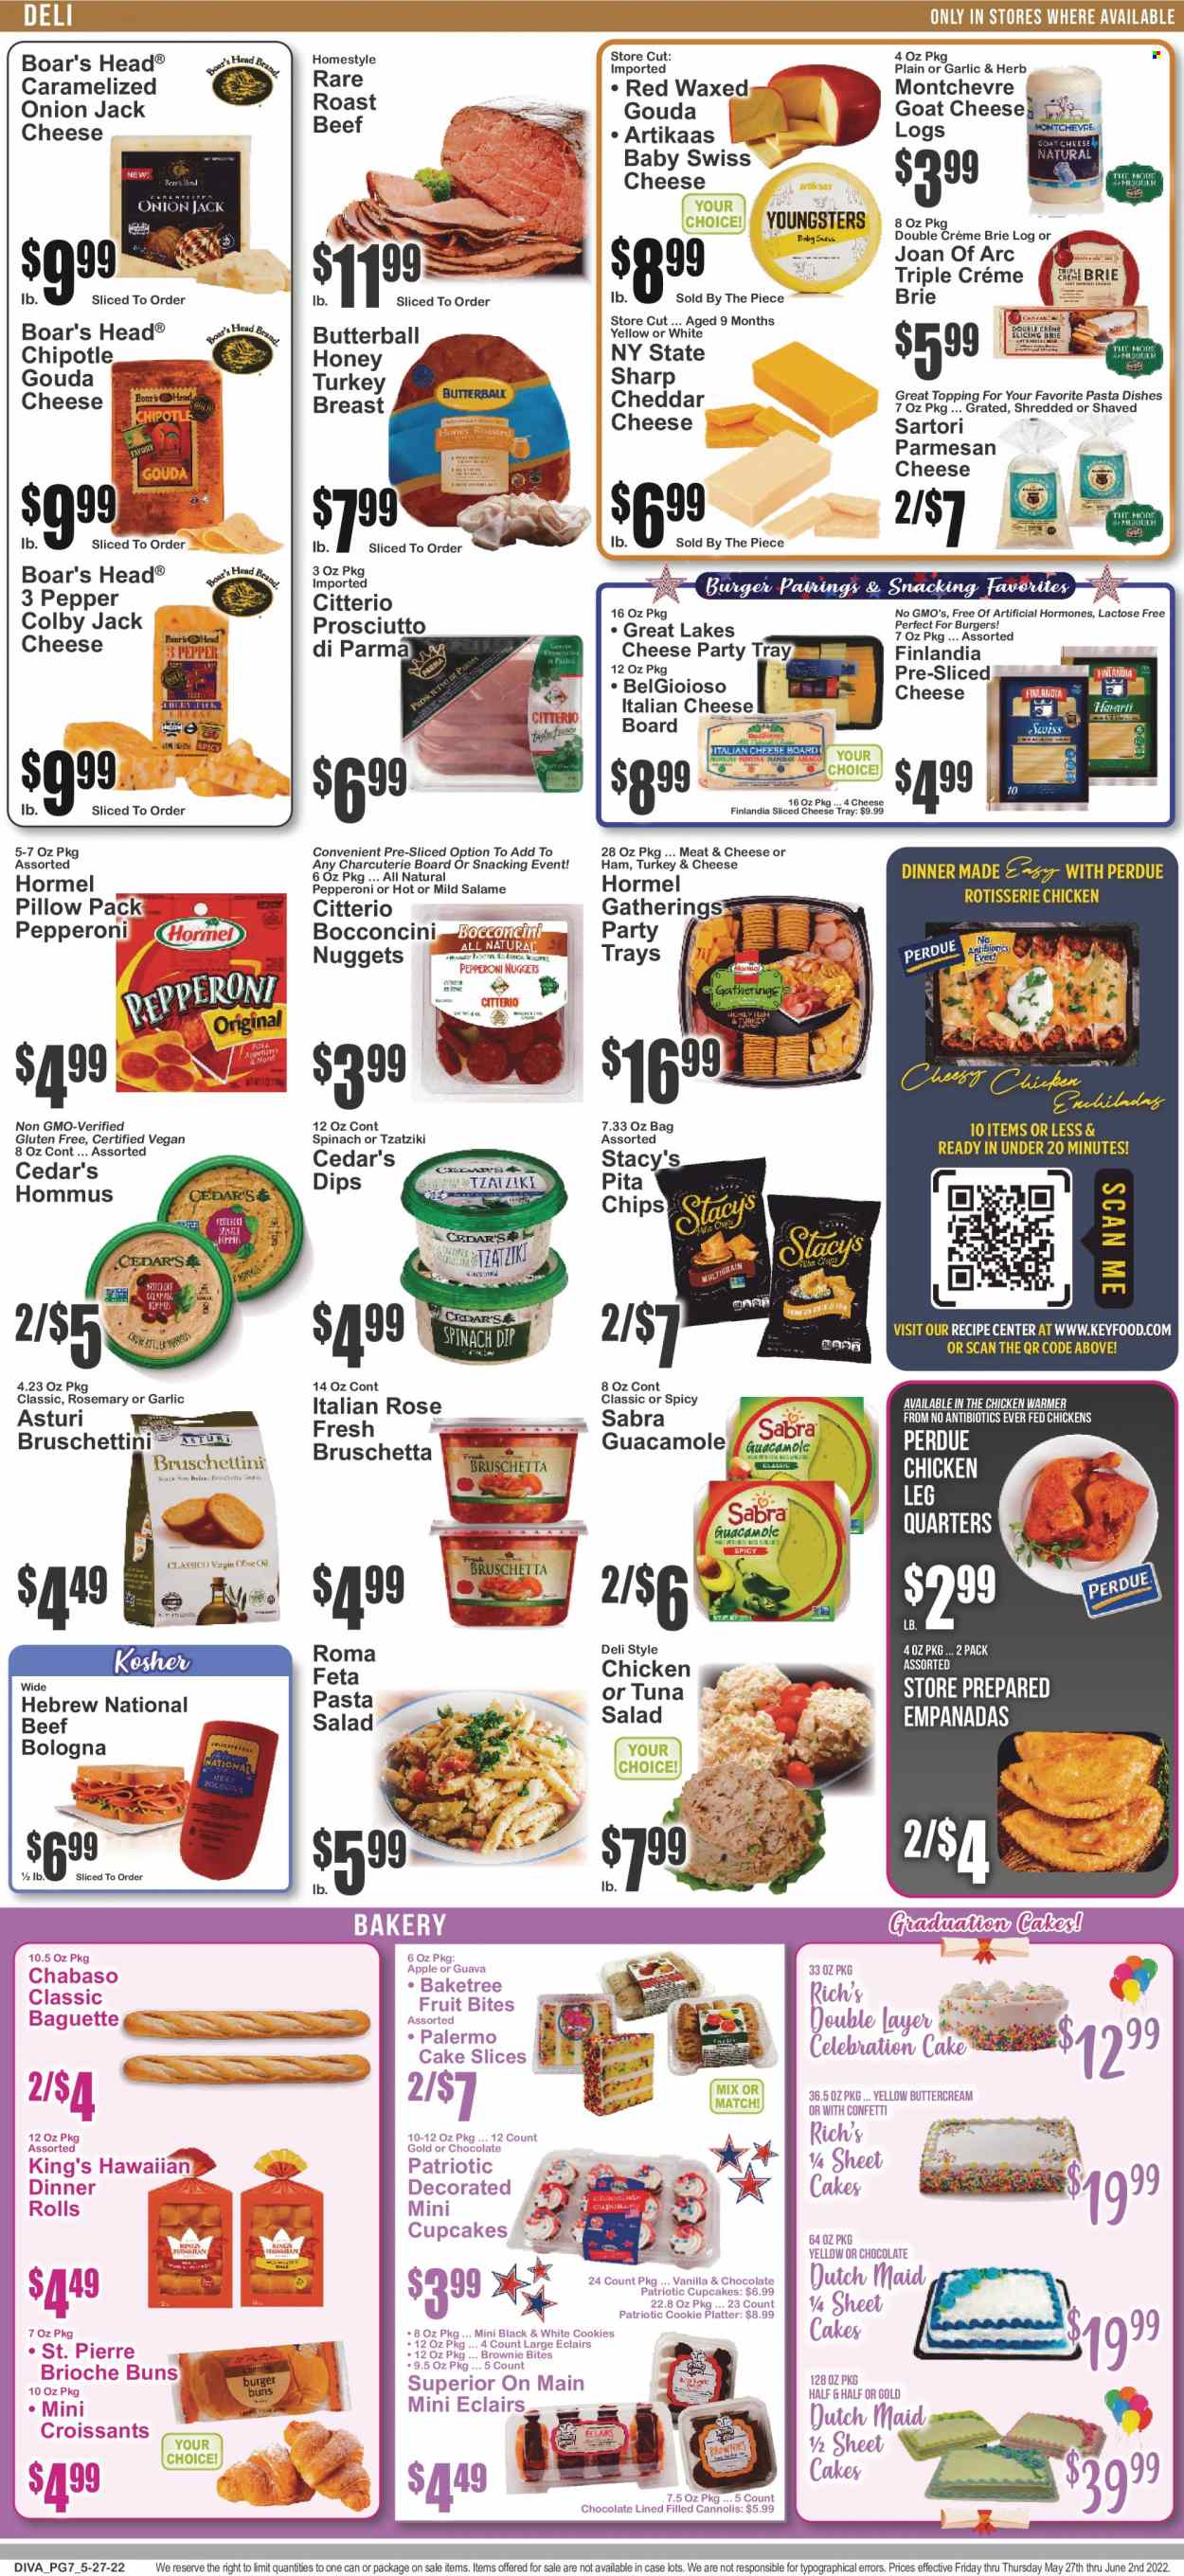 thumbnail - Key Food Flyer - 05/27/2022 - 06/02/2022 - Sales products - baguette, cake, dinner rolls, croissant, buns, brioche, cupcake, brownies, onion, guava, tuna, enchiladas, chicken enchiladas, chicken roast, nuggets, hamburger, pasta, Perdue®, pasta sides, Hormel, bruschetta, Butterball, prosciutto, bologna sausage, pepperoni, tzatziki, hummus, guacamole, tuna salad, pasta salad, bocconcini, Colby cheese, goat cheese, gouda, sliced cheese, swiss cheese, parmesan, brie, Montchevre, cookies, chocolate, Celebration, chips, pita chips, topping, rosemary, honey, wine, rosé wine, turkey breast, chicken legs, beef meat, roast beef, cheese board, rose, Half and half. Page 7.